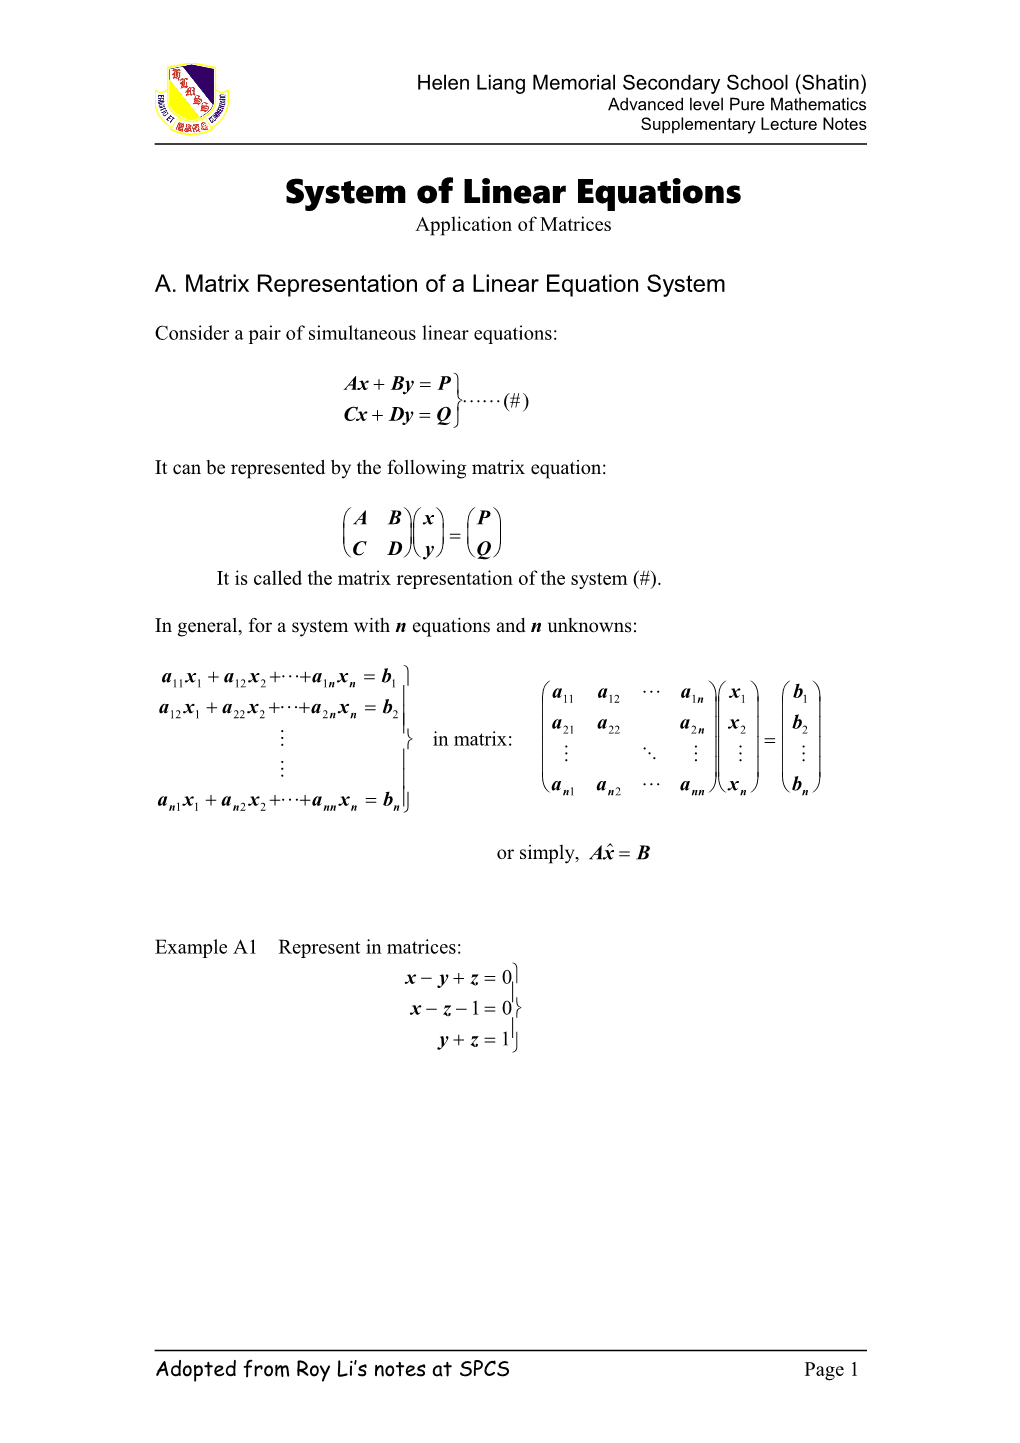 System of Linear Eqns